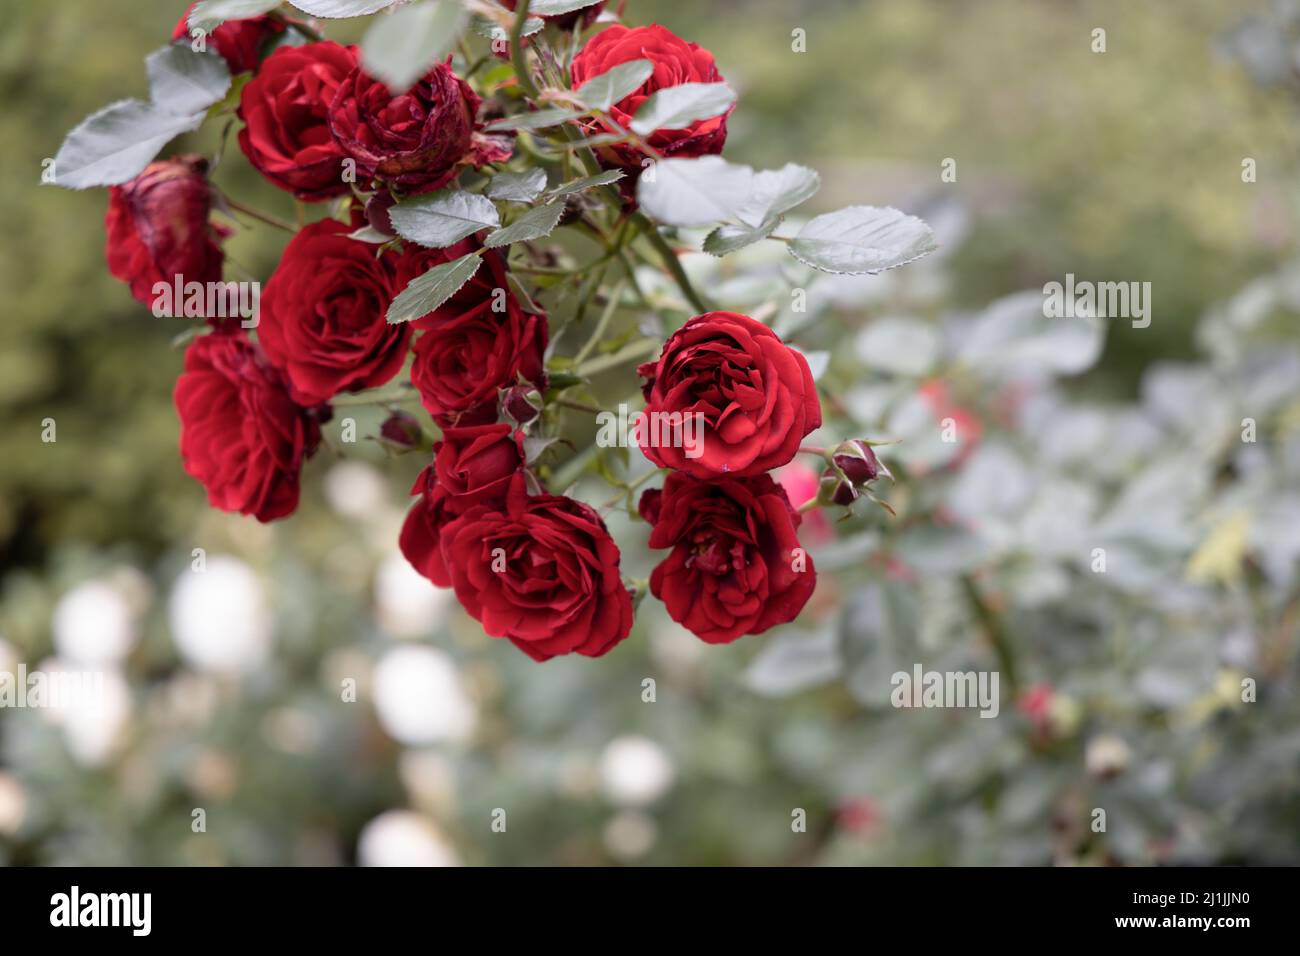 Blooming top of the shrub with scarlet rosebuds on a blurry background with white petals Stock Photo